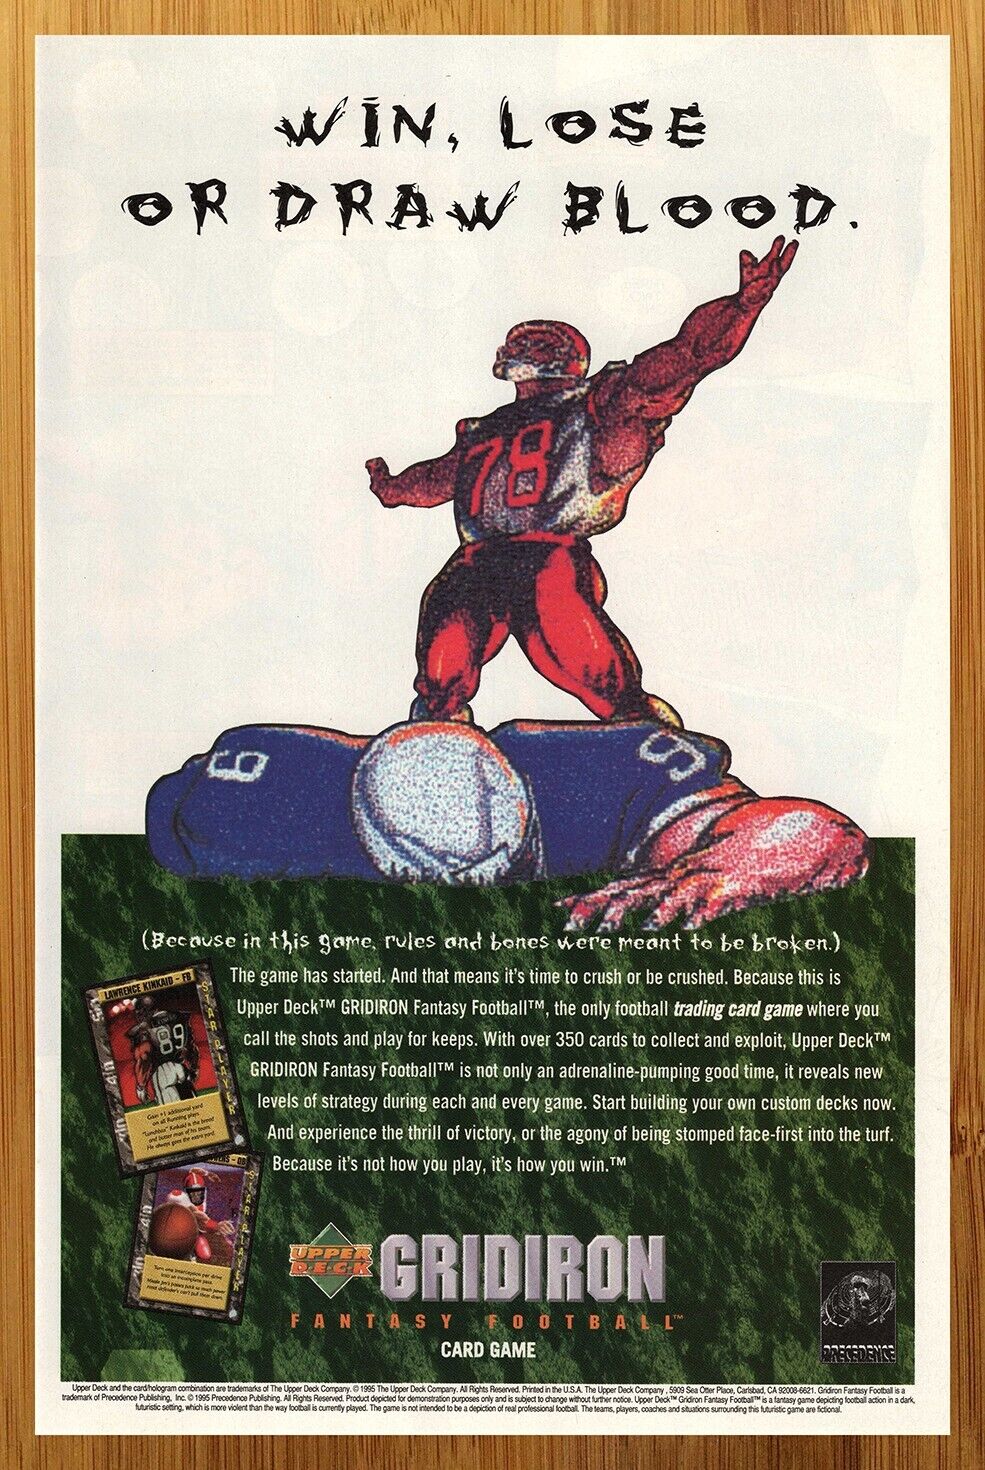 1995 Upper Deck Gridiron Fantasy Football Trading Card Game Print Ad/Poster 90s